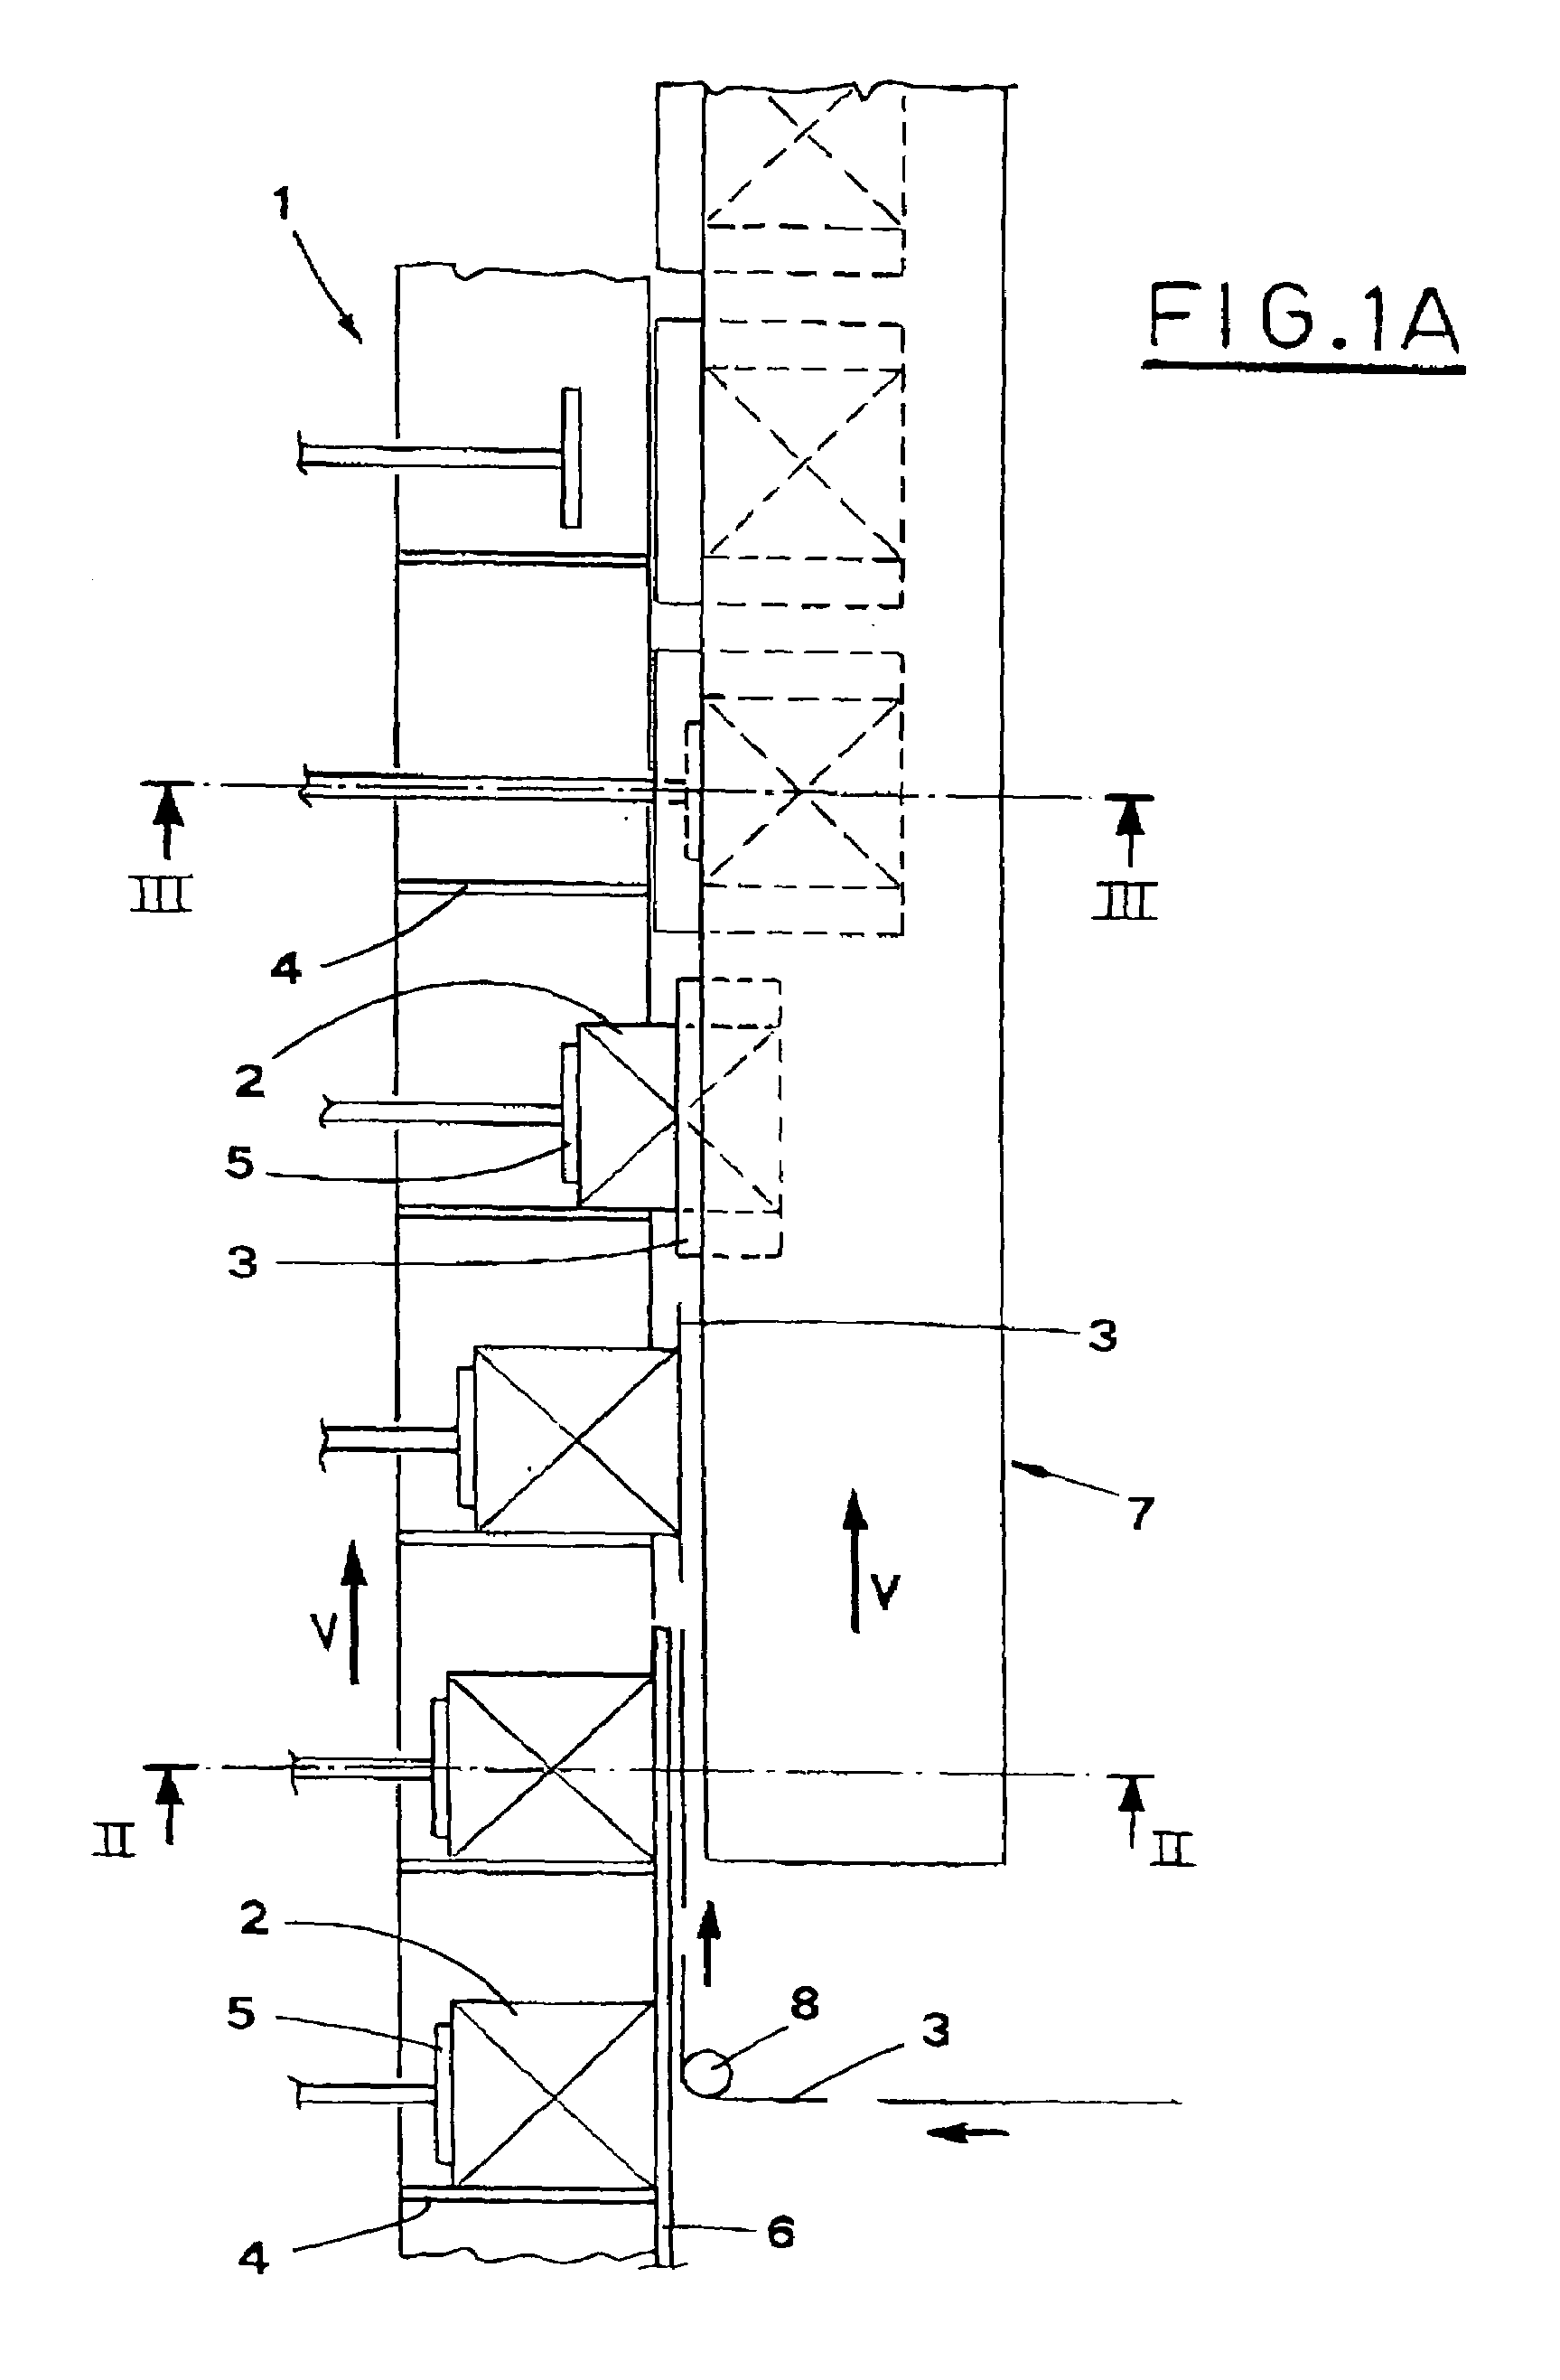 Method and apparatus for wrapping articles with a packaging sheet